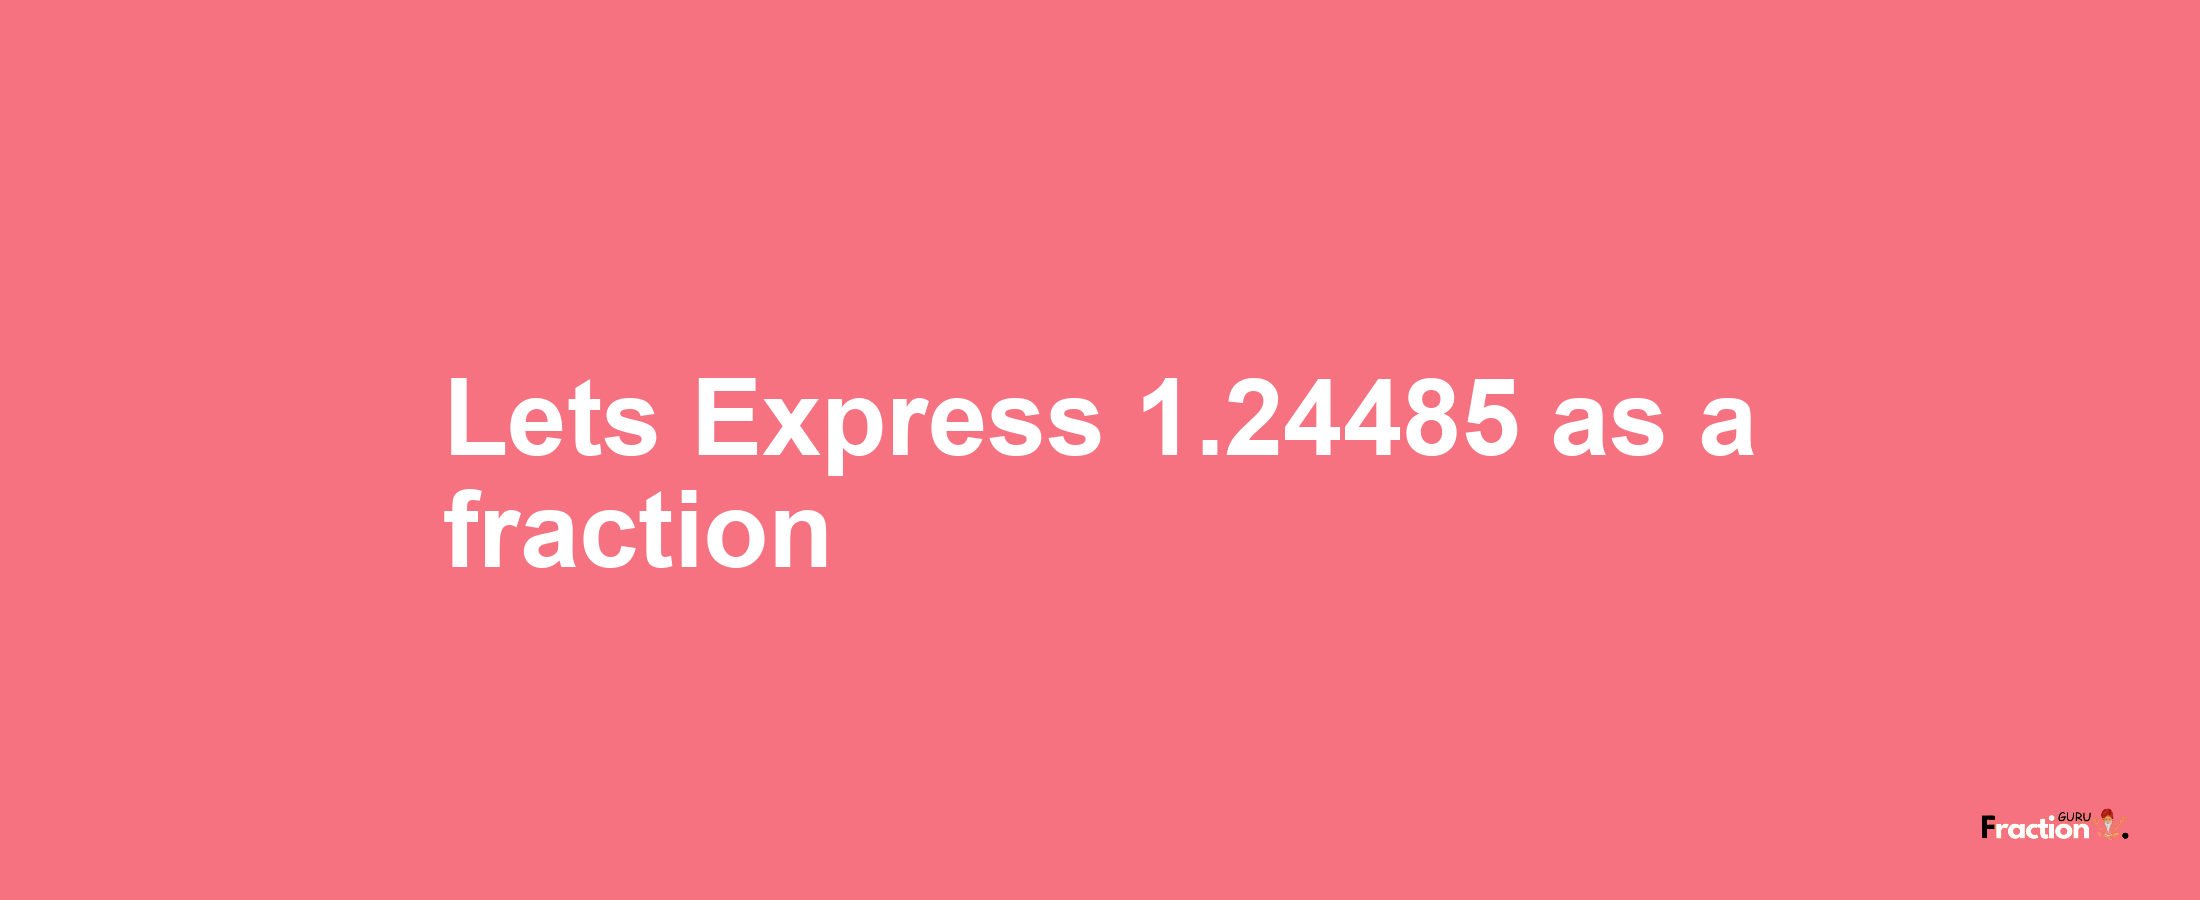 Lets Express 1.24485 as afraction